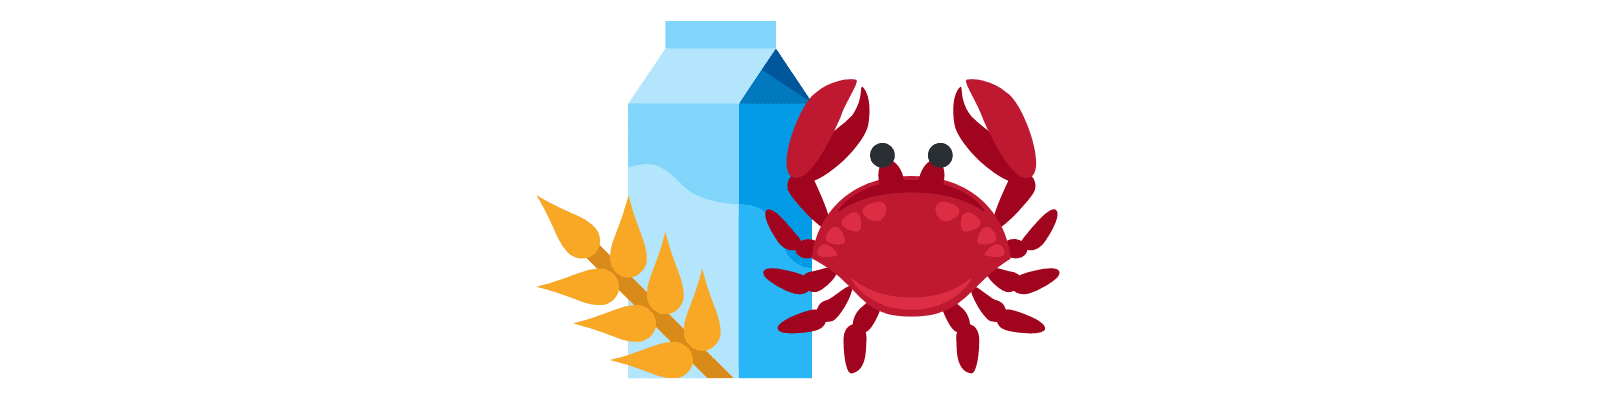 picture of oat milk and red crab